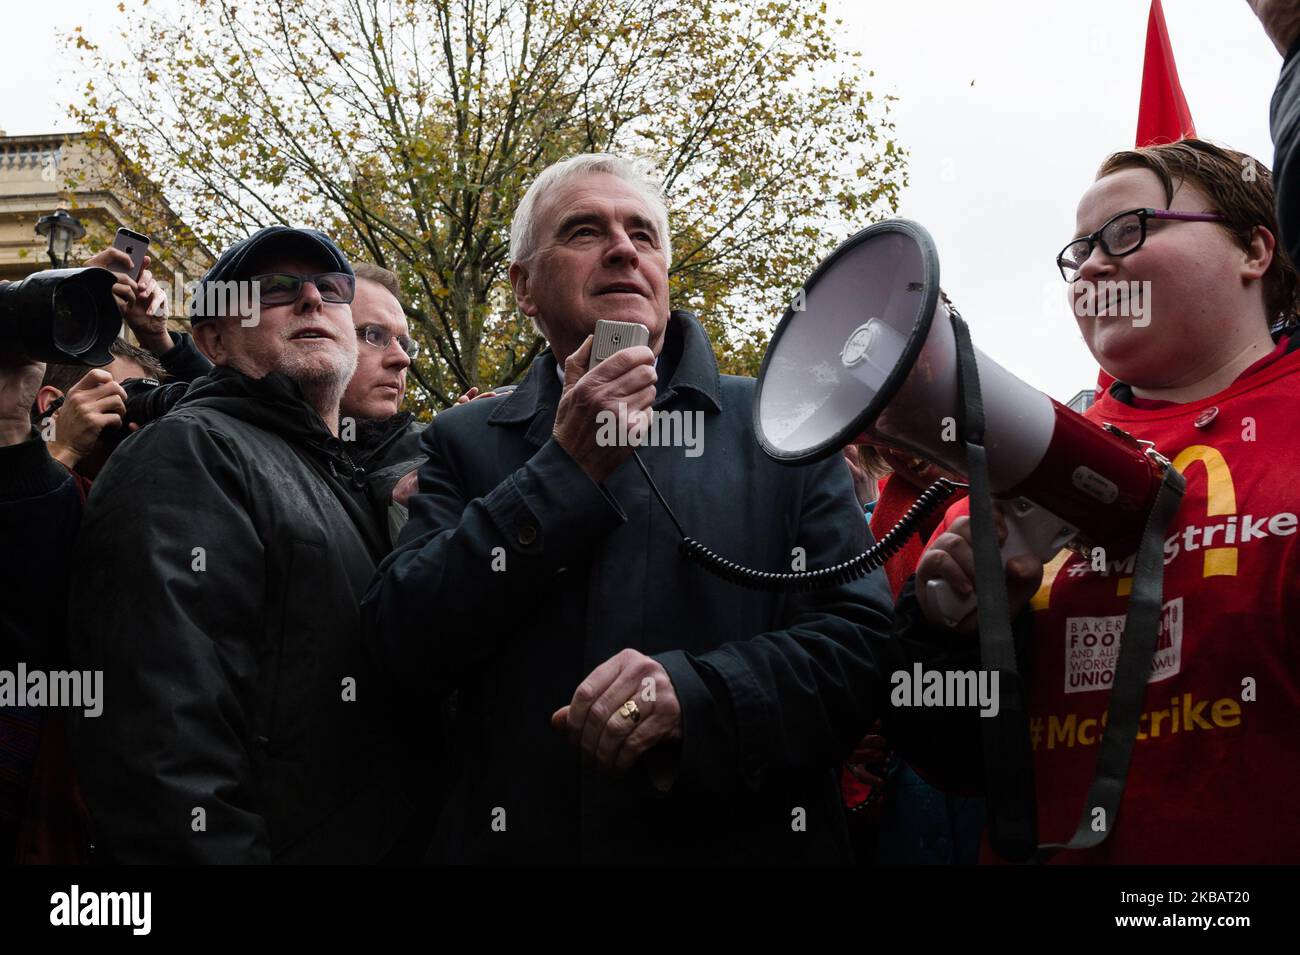 Shadow Chancellor John McDonnell takes part in a rally as McDonald's employees, trade unionists and campaigners for fast food workers' rights gather outside Downing Street on 12 November, 2019 in London, England. Members of the Bakers, Food and Allied Workers Union (BFAWU) walked out of six McDonald's stores in London today over a ?15 an hour minimum wage, choice of guaranteed working hours and union rights. (Photo by WIktor Szymanowicz/NurPhoto) Stock Photo